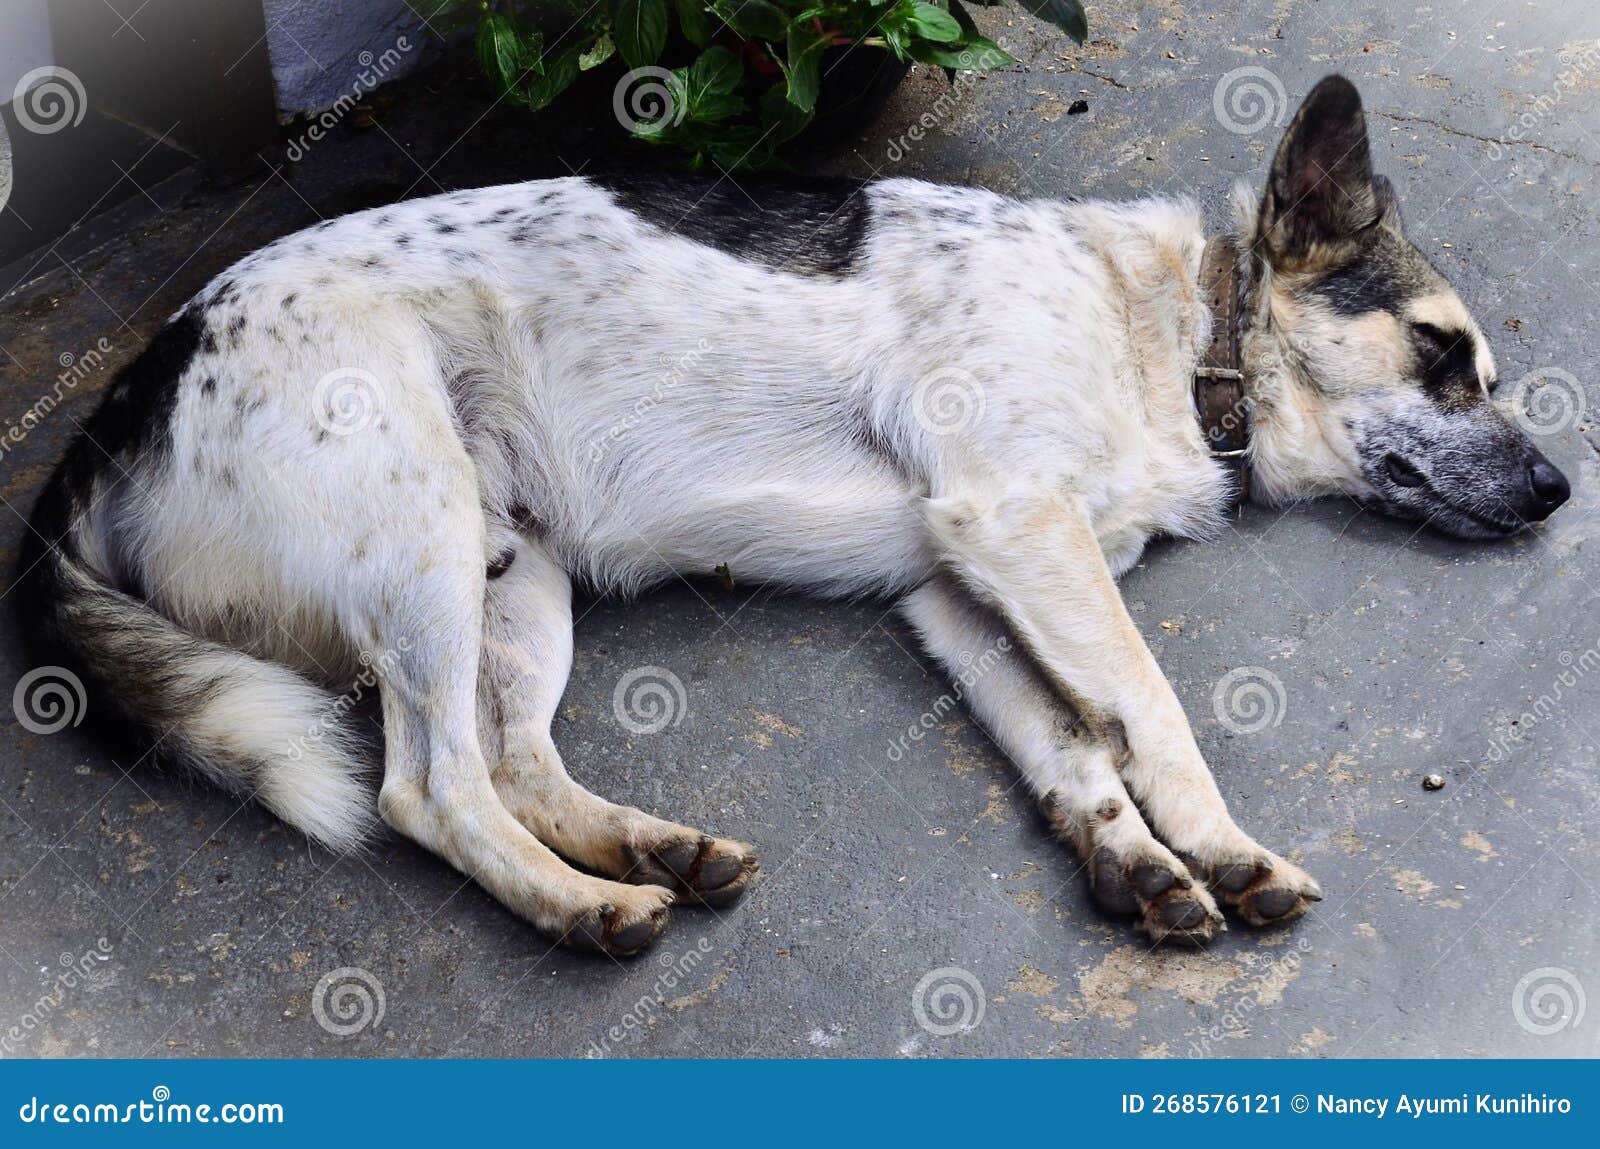 a mixed breed dog of various colors lying on the floor